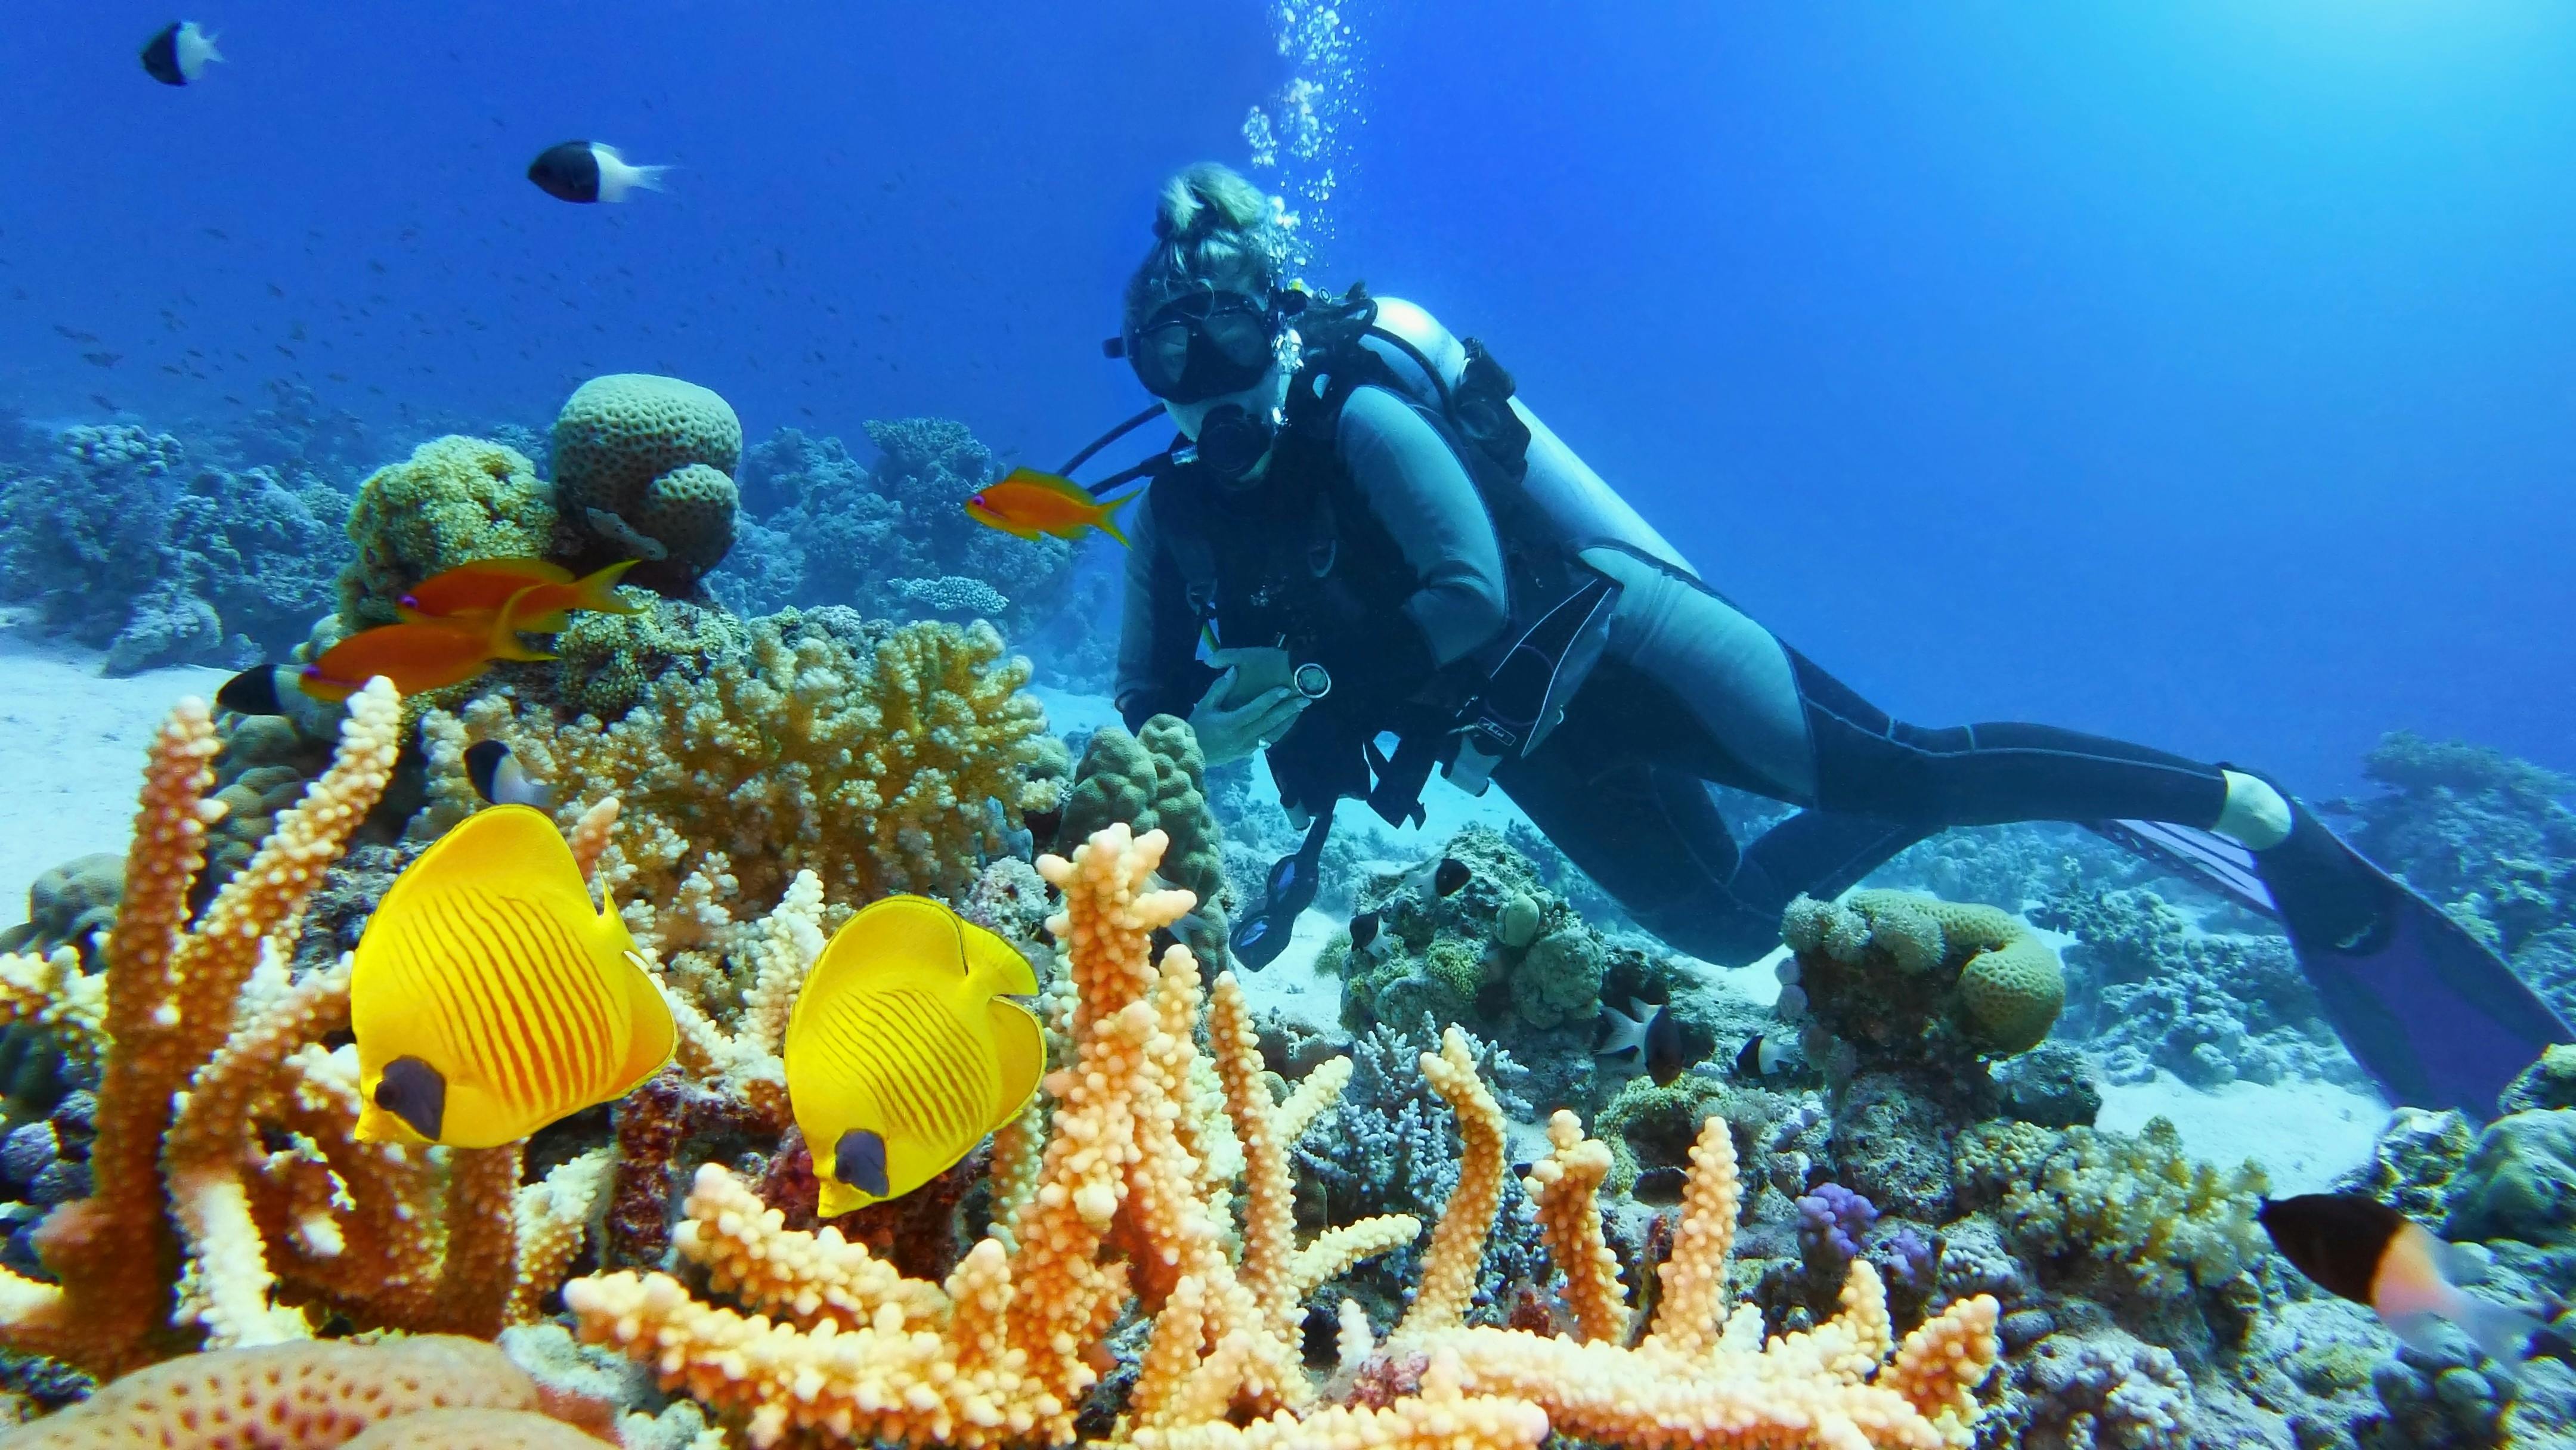 Full-day diving experience at the Great Barrier Reef with PADI guide